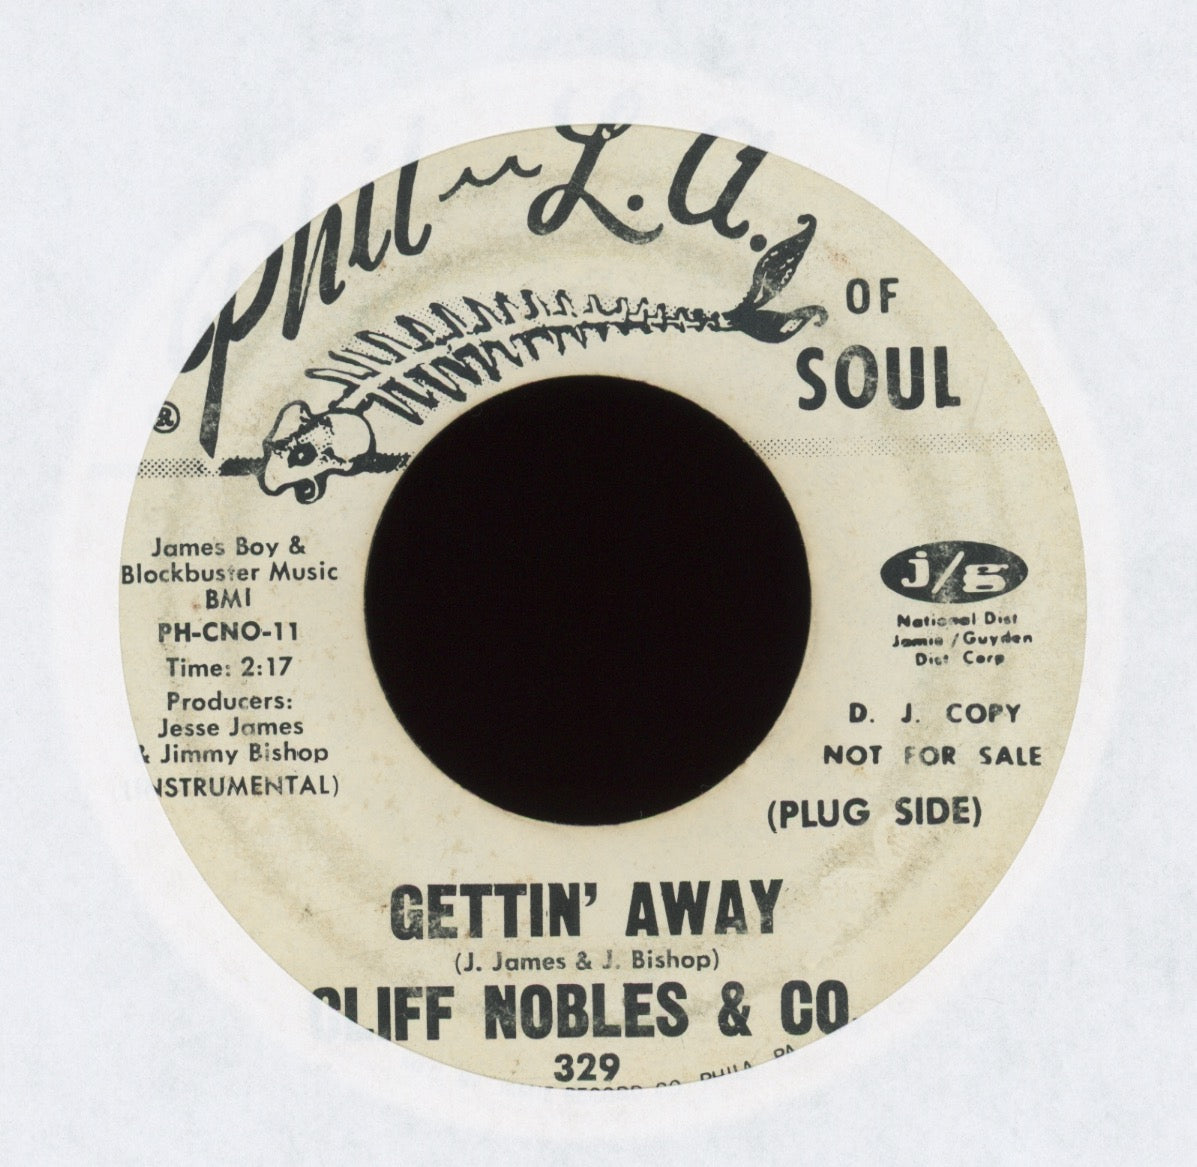 Cliff Nobles & Co - Gettin' Away on Phil L.A. of Soul Promo Funk Soul 45